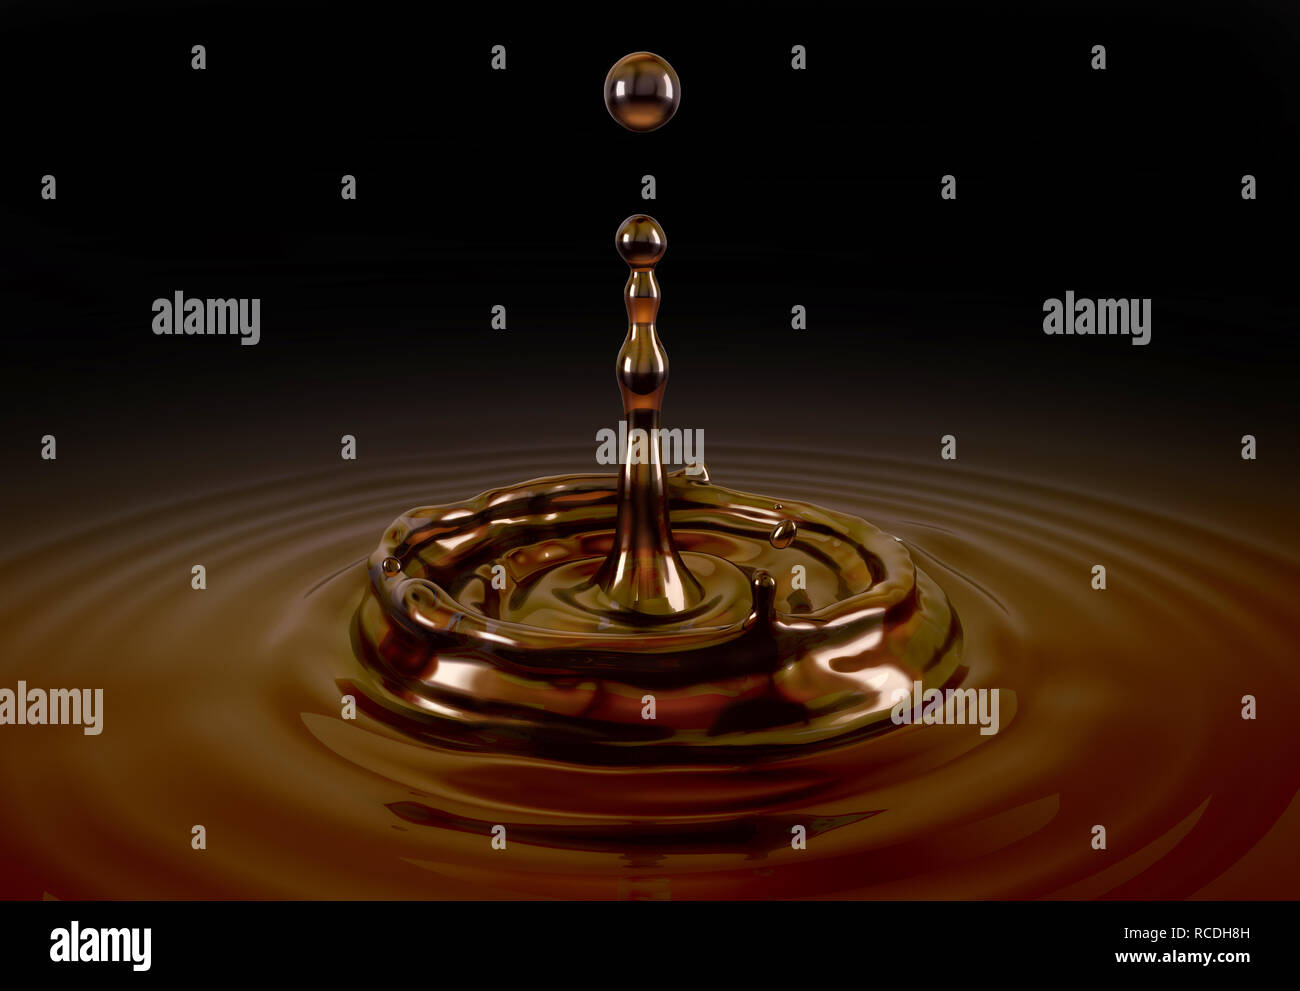 Single liquid coffee drop splash in coffee pool. Close up view on black background. Clipping path included. Stock Photo